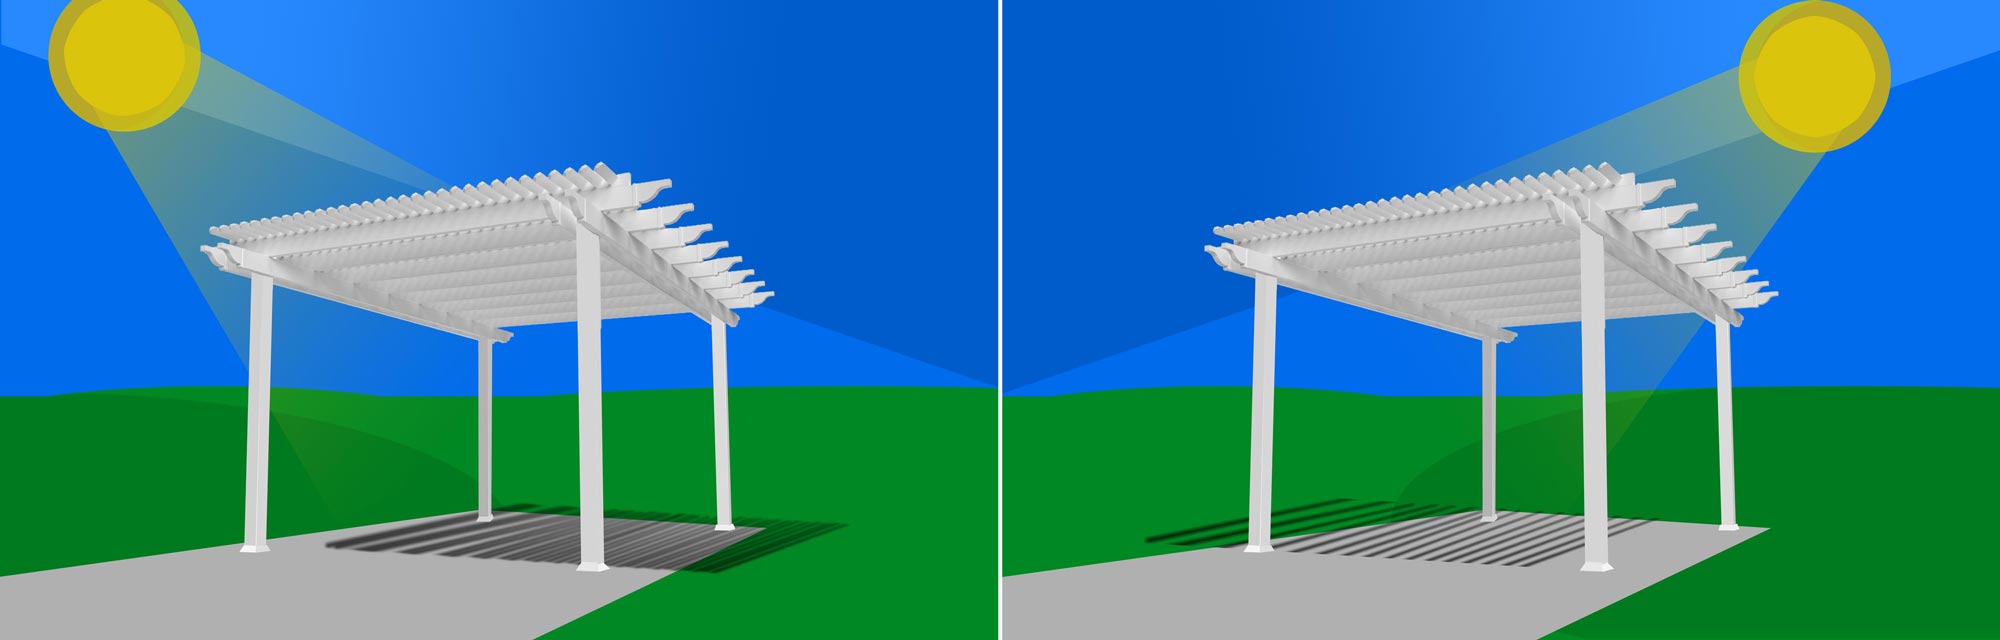 illustration of a sun moving across the sky and how it changes the shade below the pergola